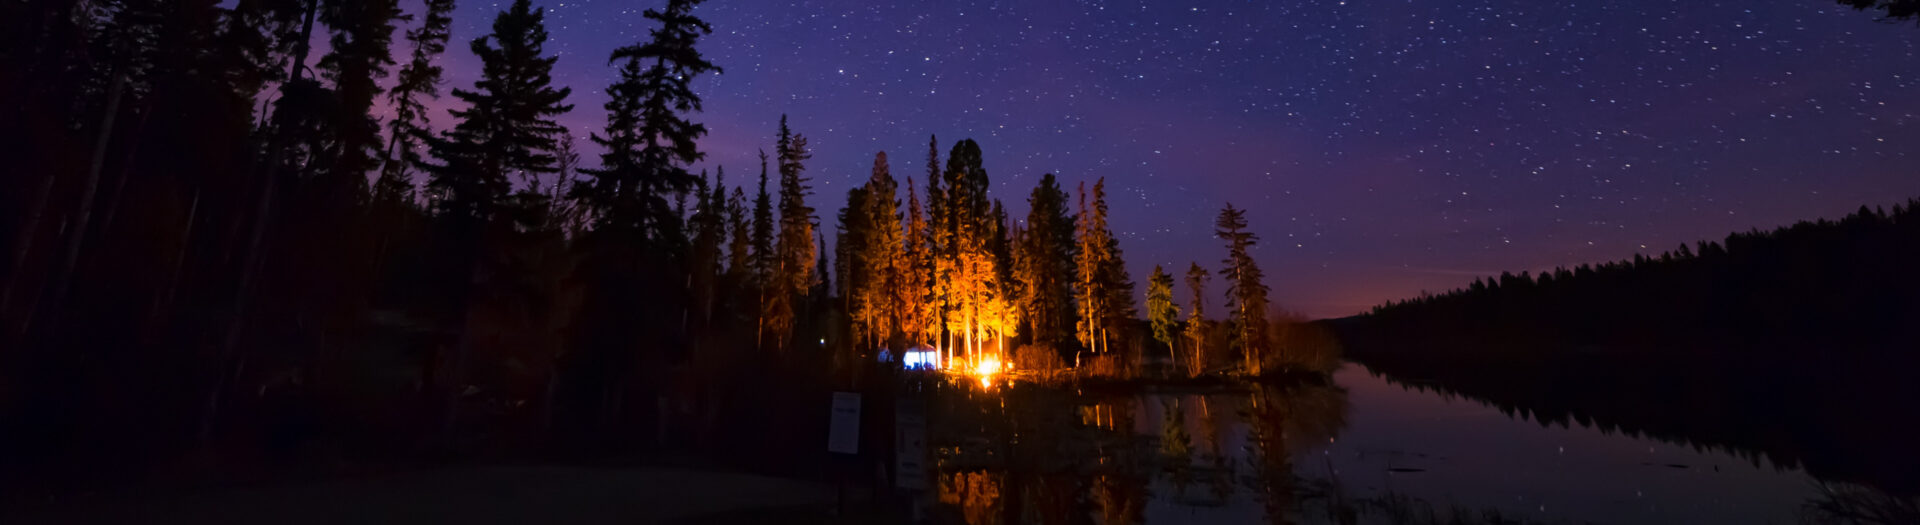 Image of a campfire at night next to a still lake with a starry sky above